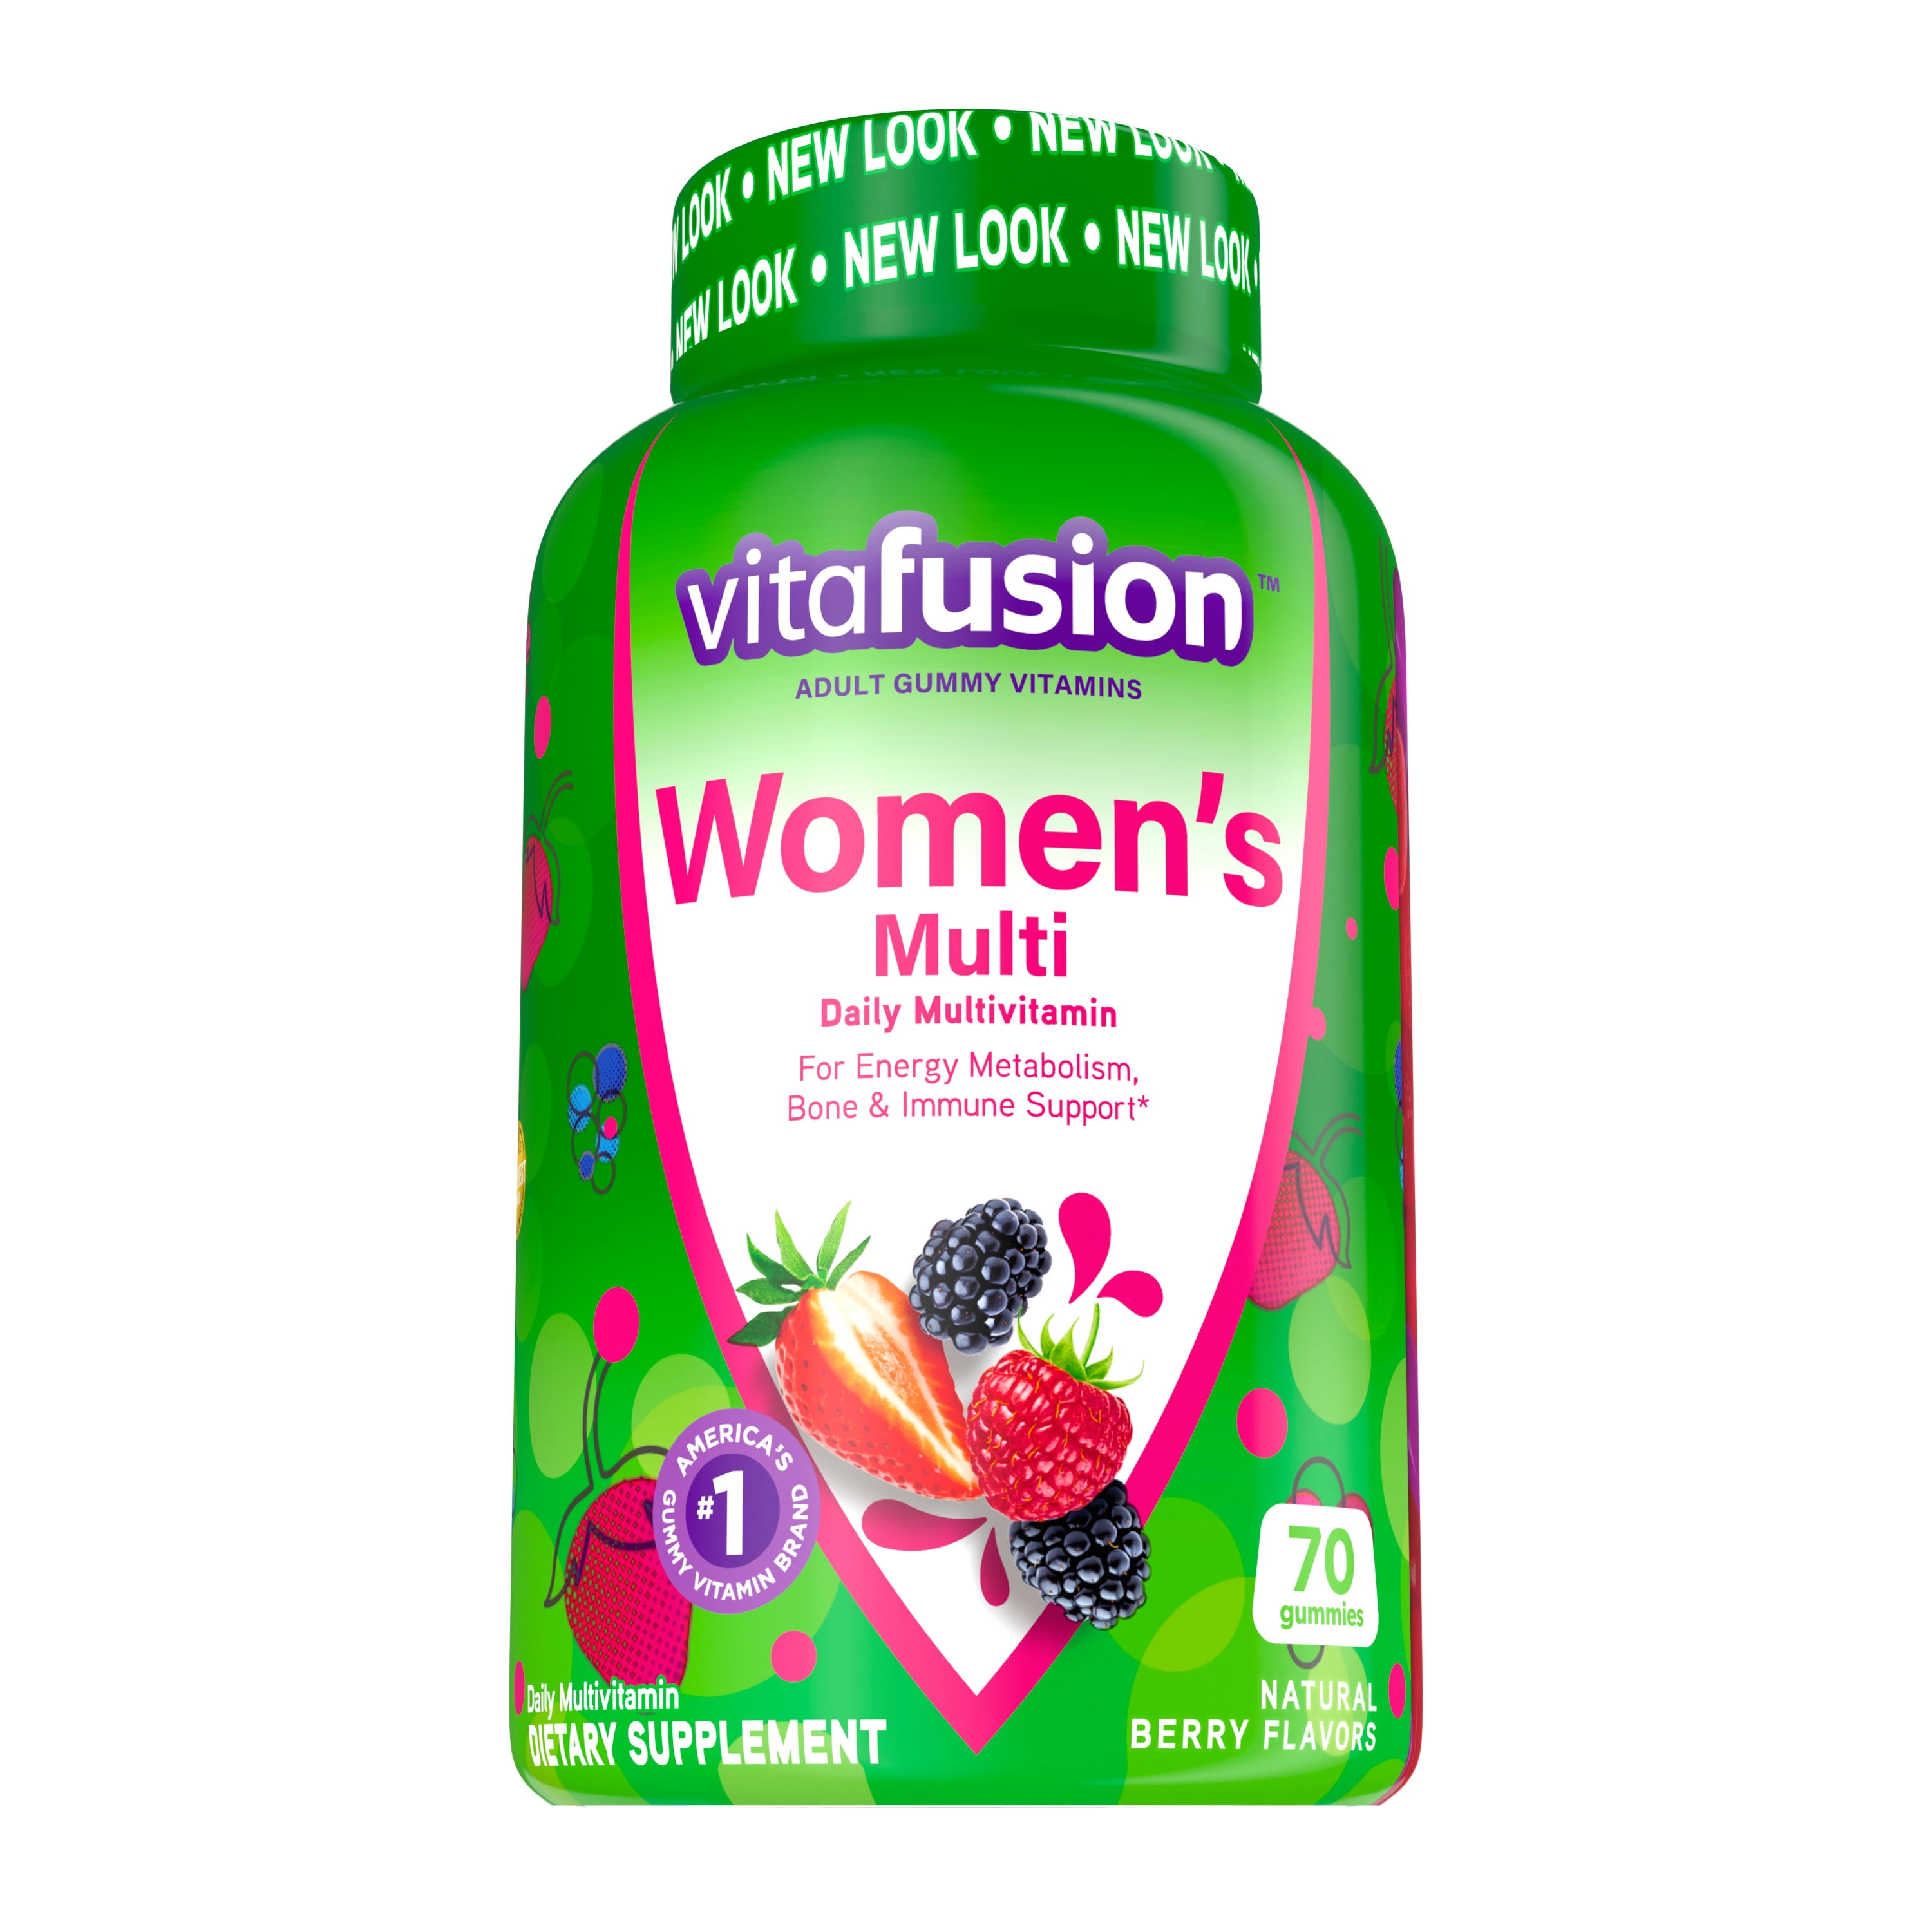 vitafusion Womens Daily Gummy Multivitamin: vitamin C  E, Delicious Berry Flavors, 70ct (35 day supply), from Americas number one Gummy Vitamin Brand